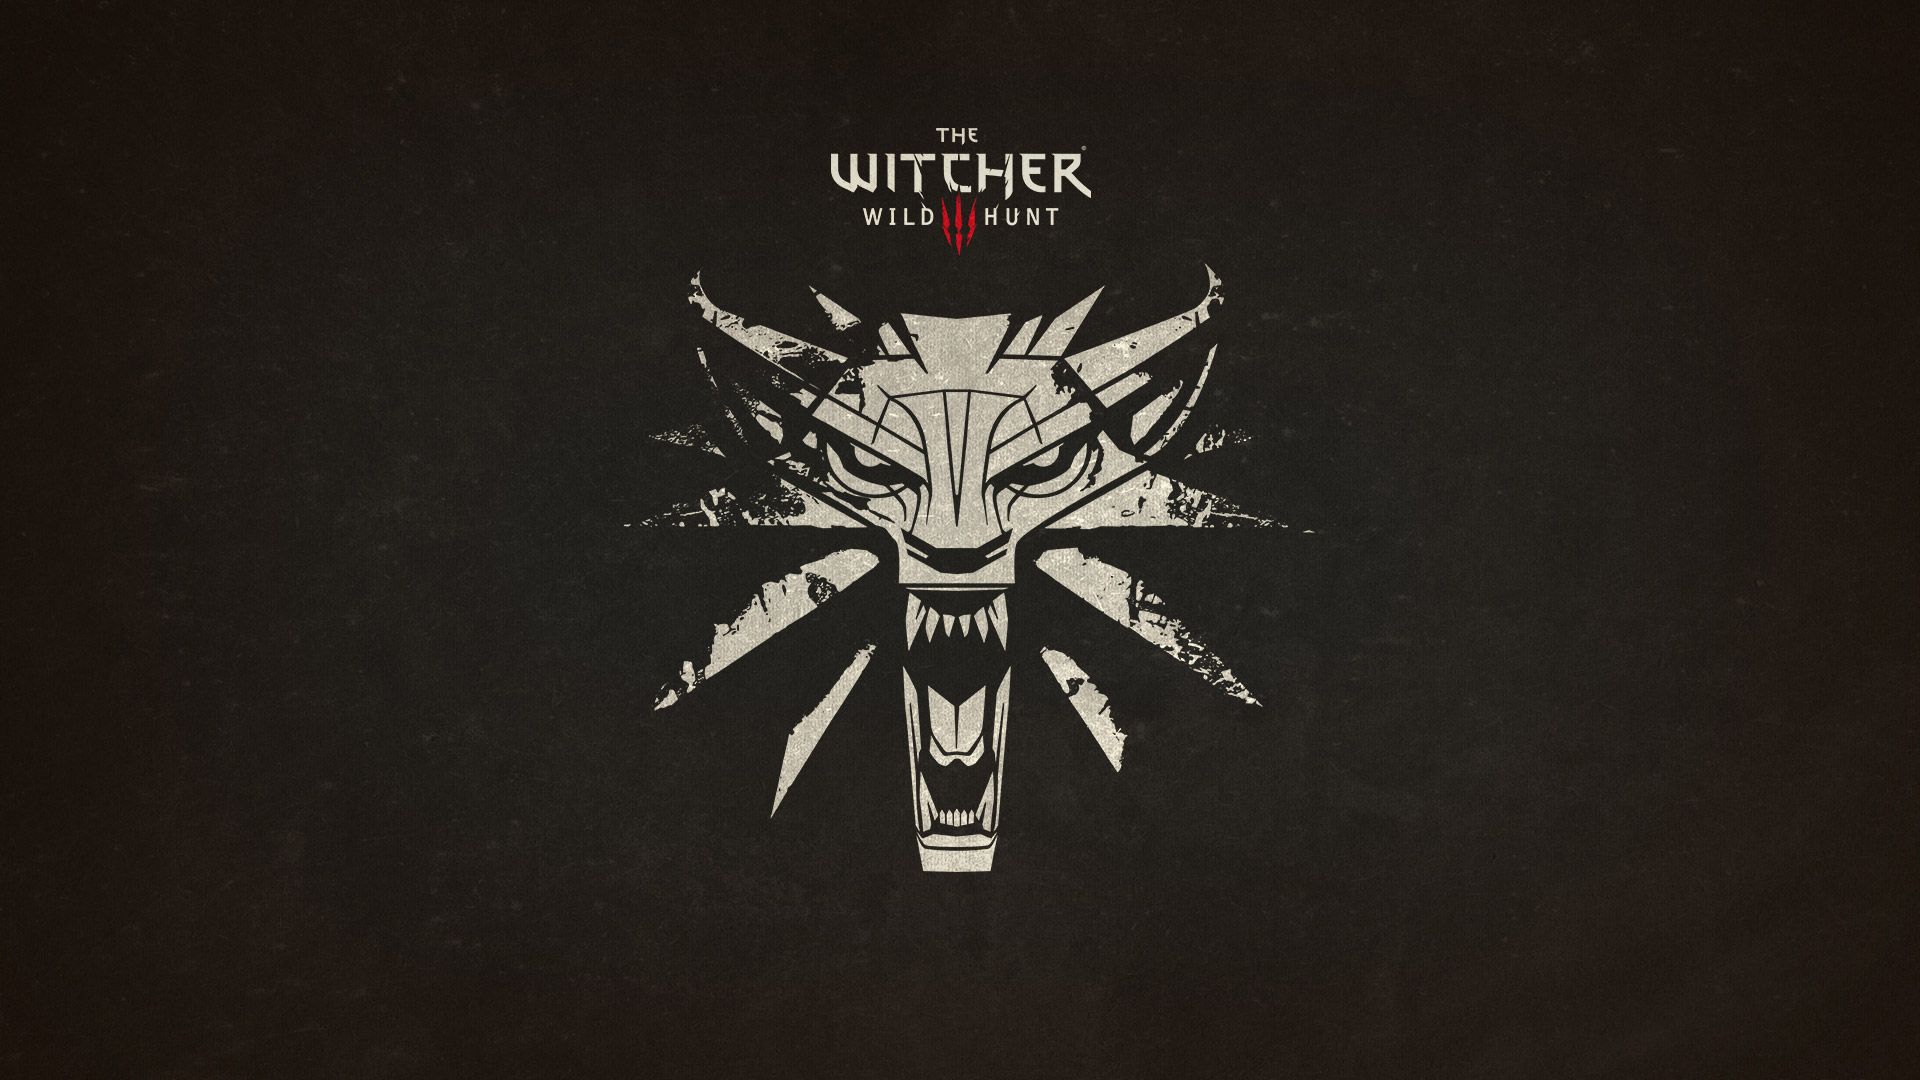 Free The Witcher 3 Wallpaper in 1920x1080pcgamewallpaper.net